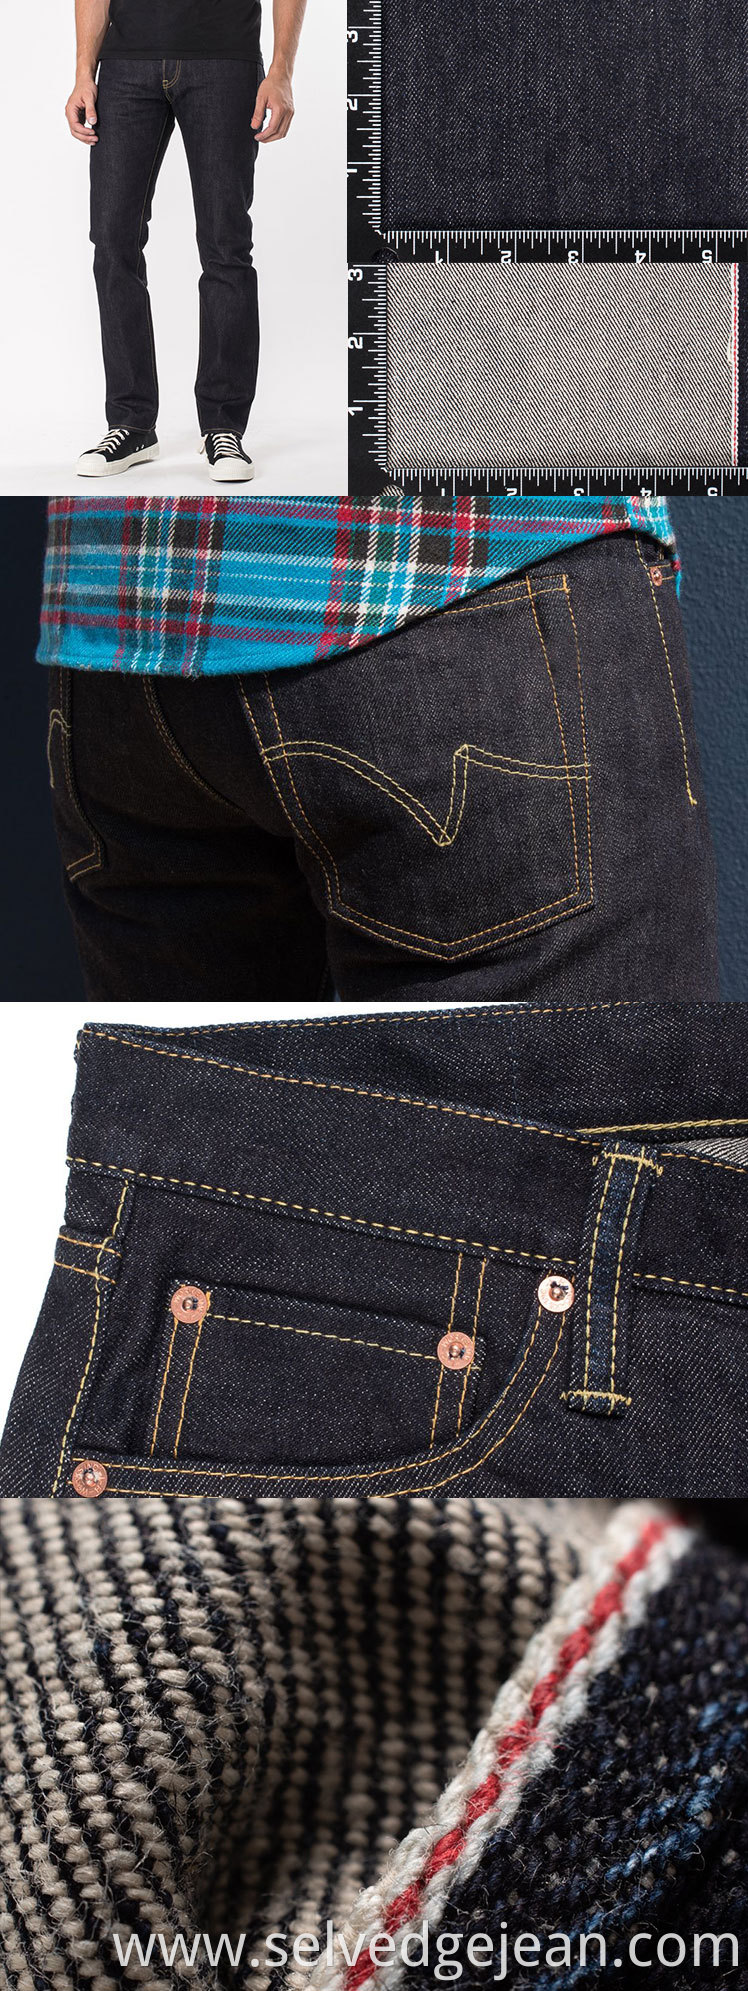 free samples denim fabric for no shrinkage to be expected mens selvedge private label denim jeans